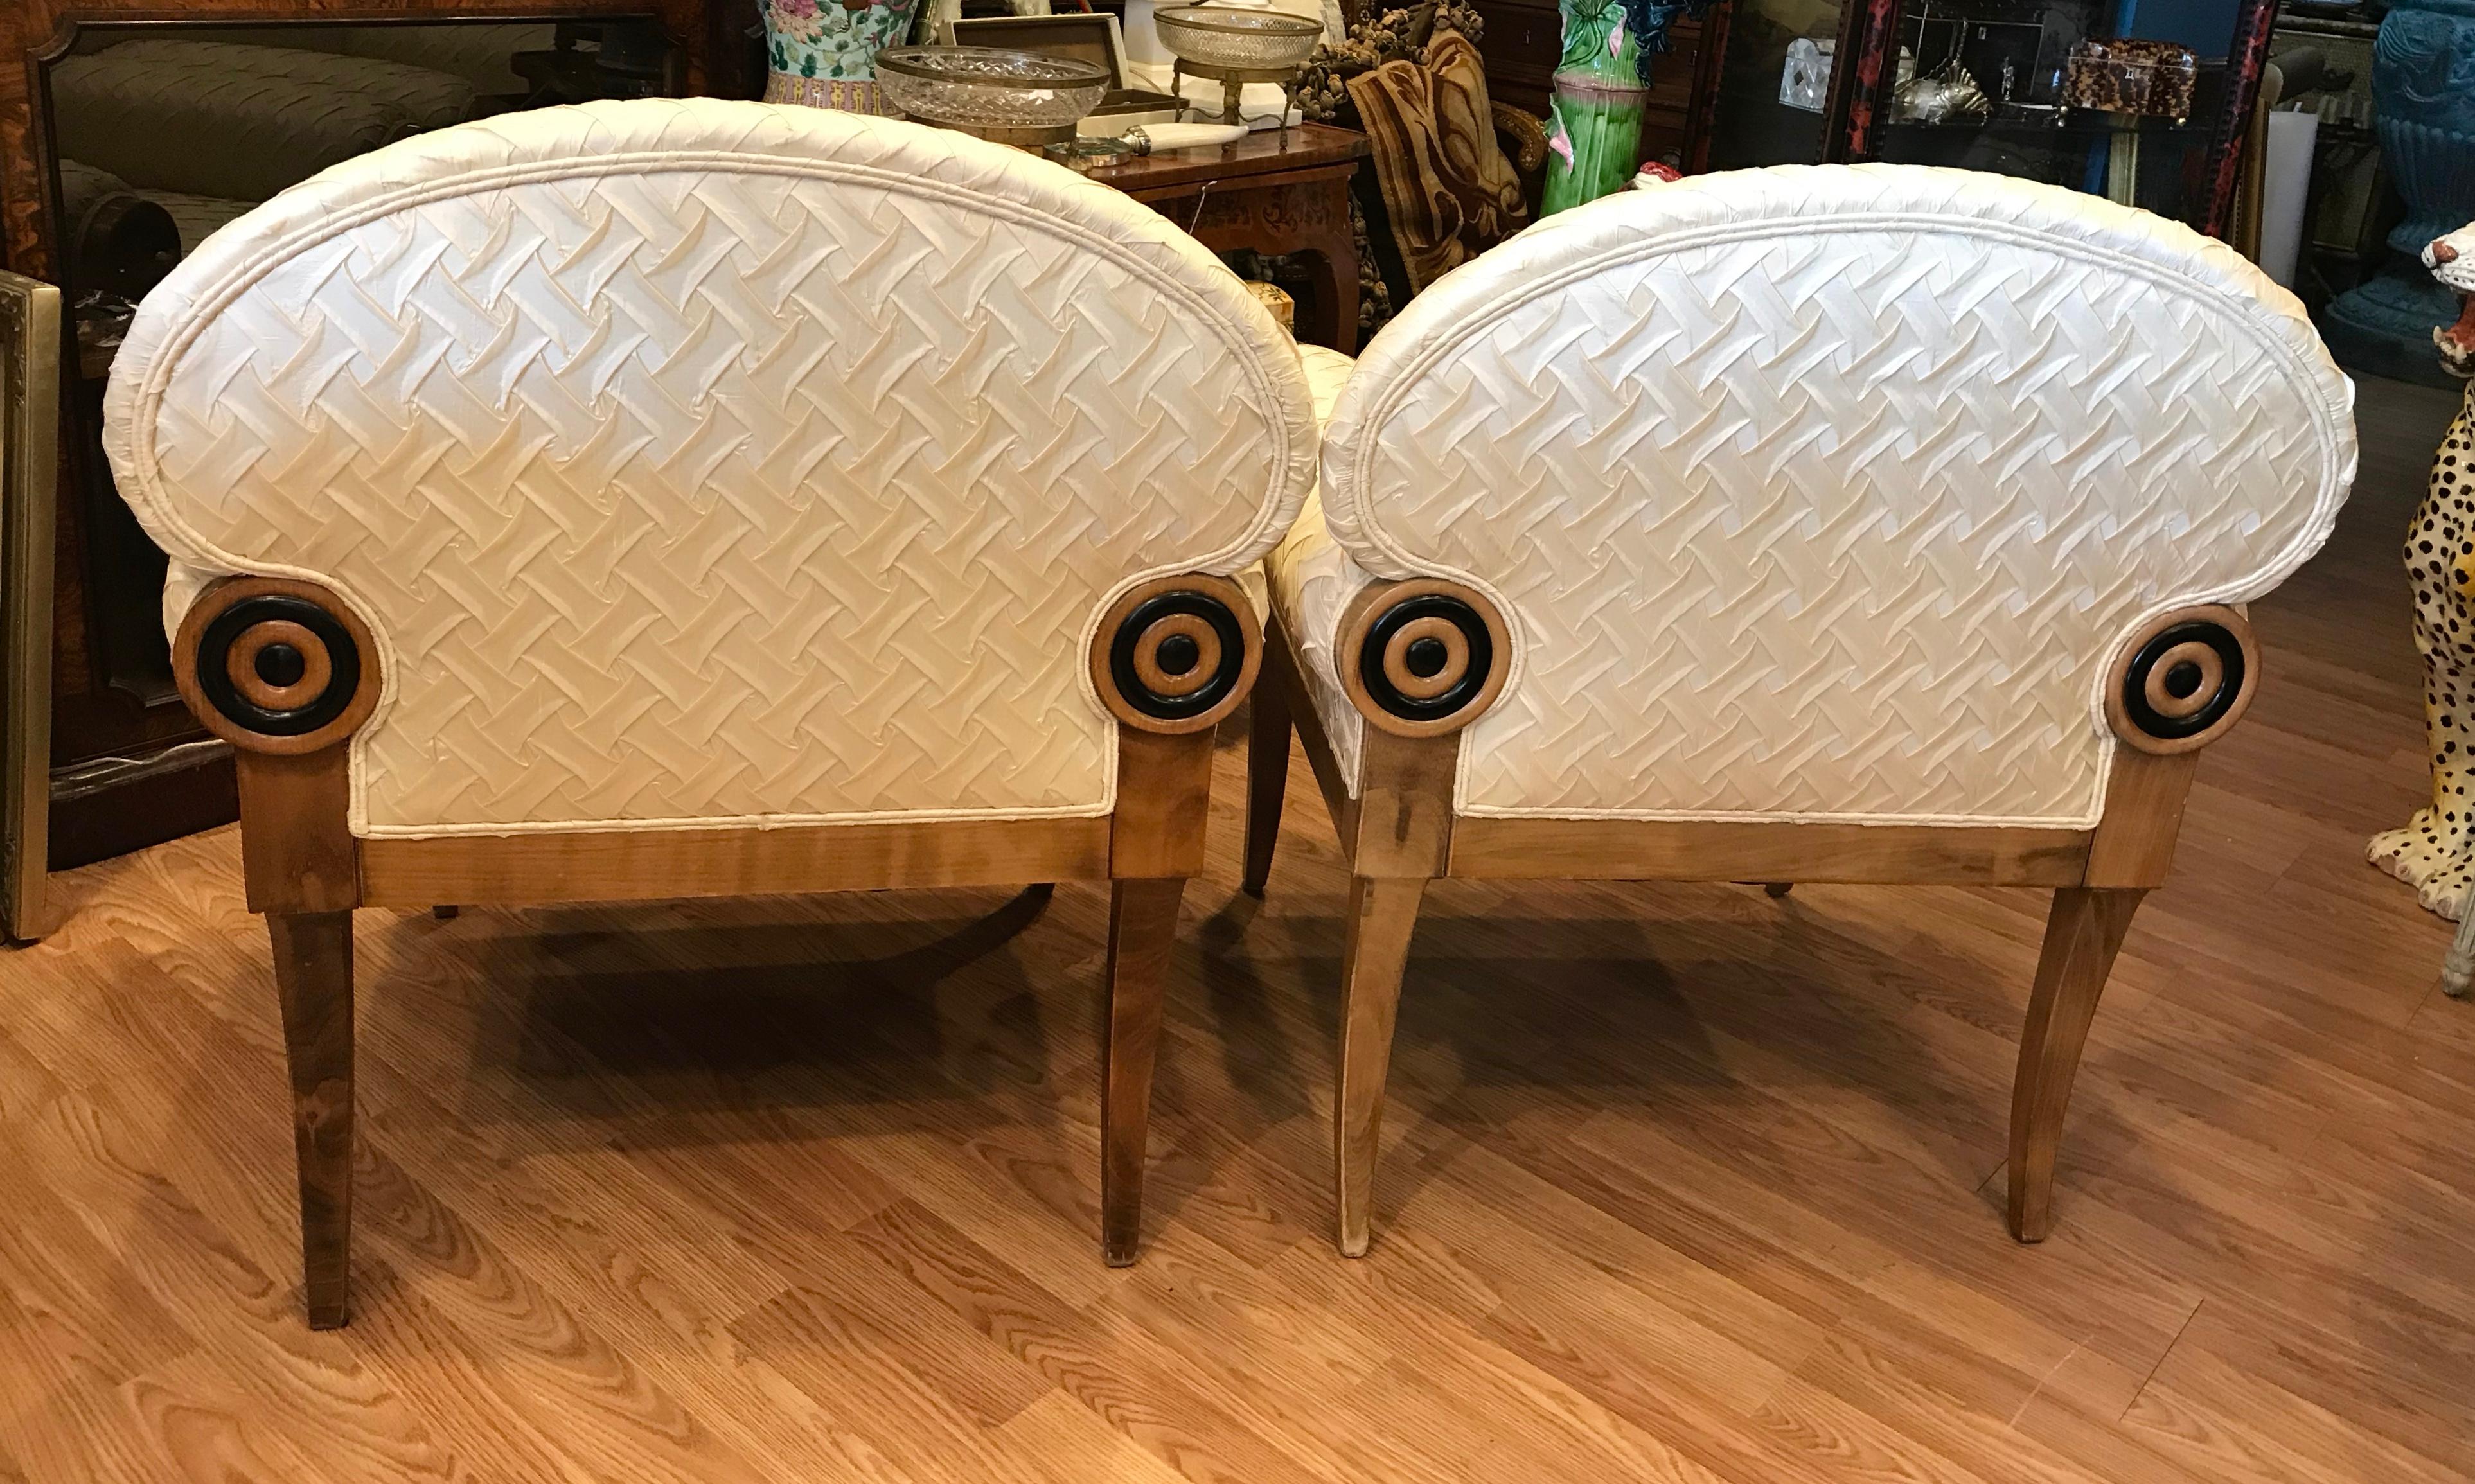 Pair of Art Deco Inspired Midcentury Club Chairs 2